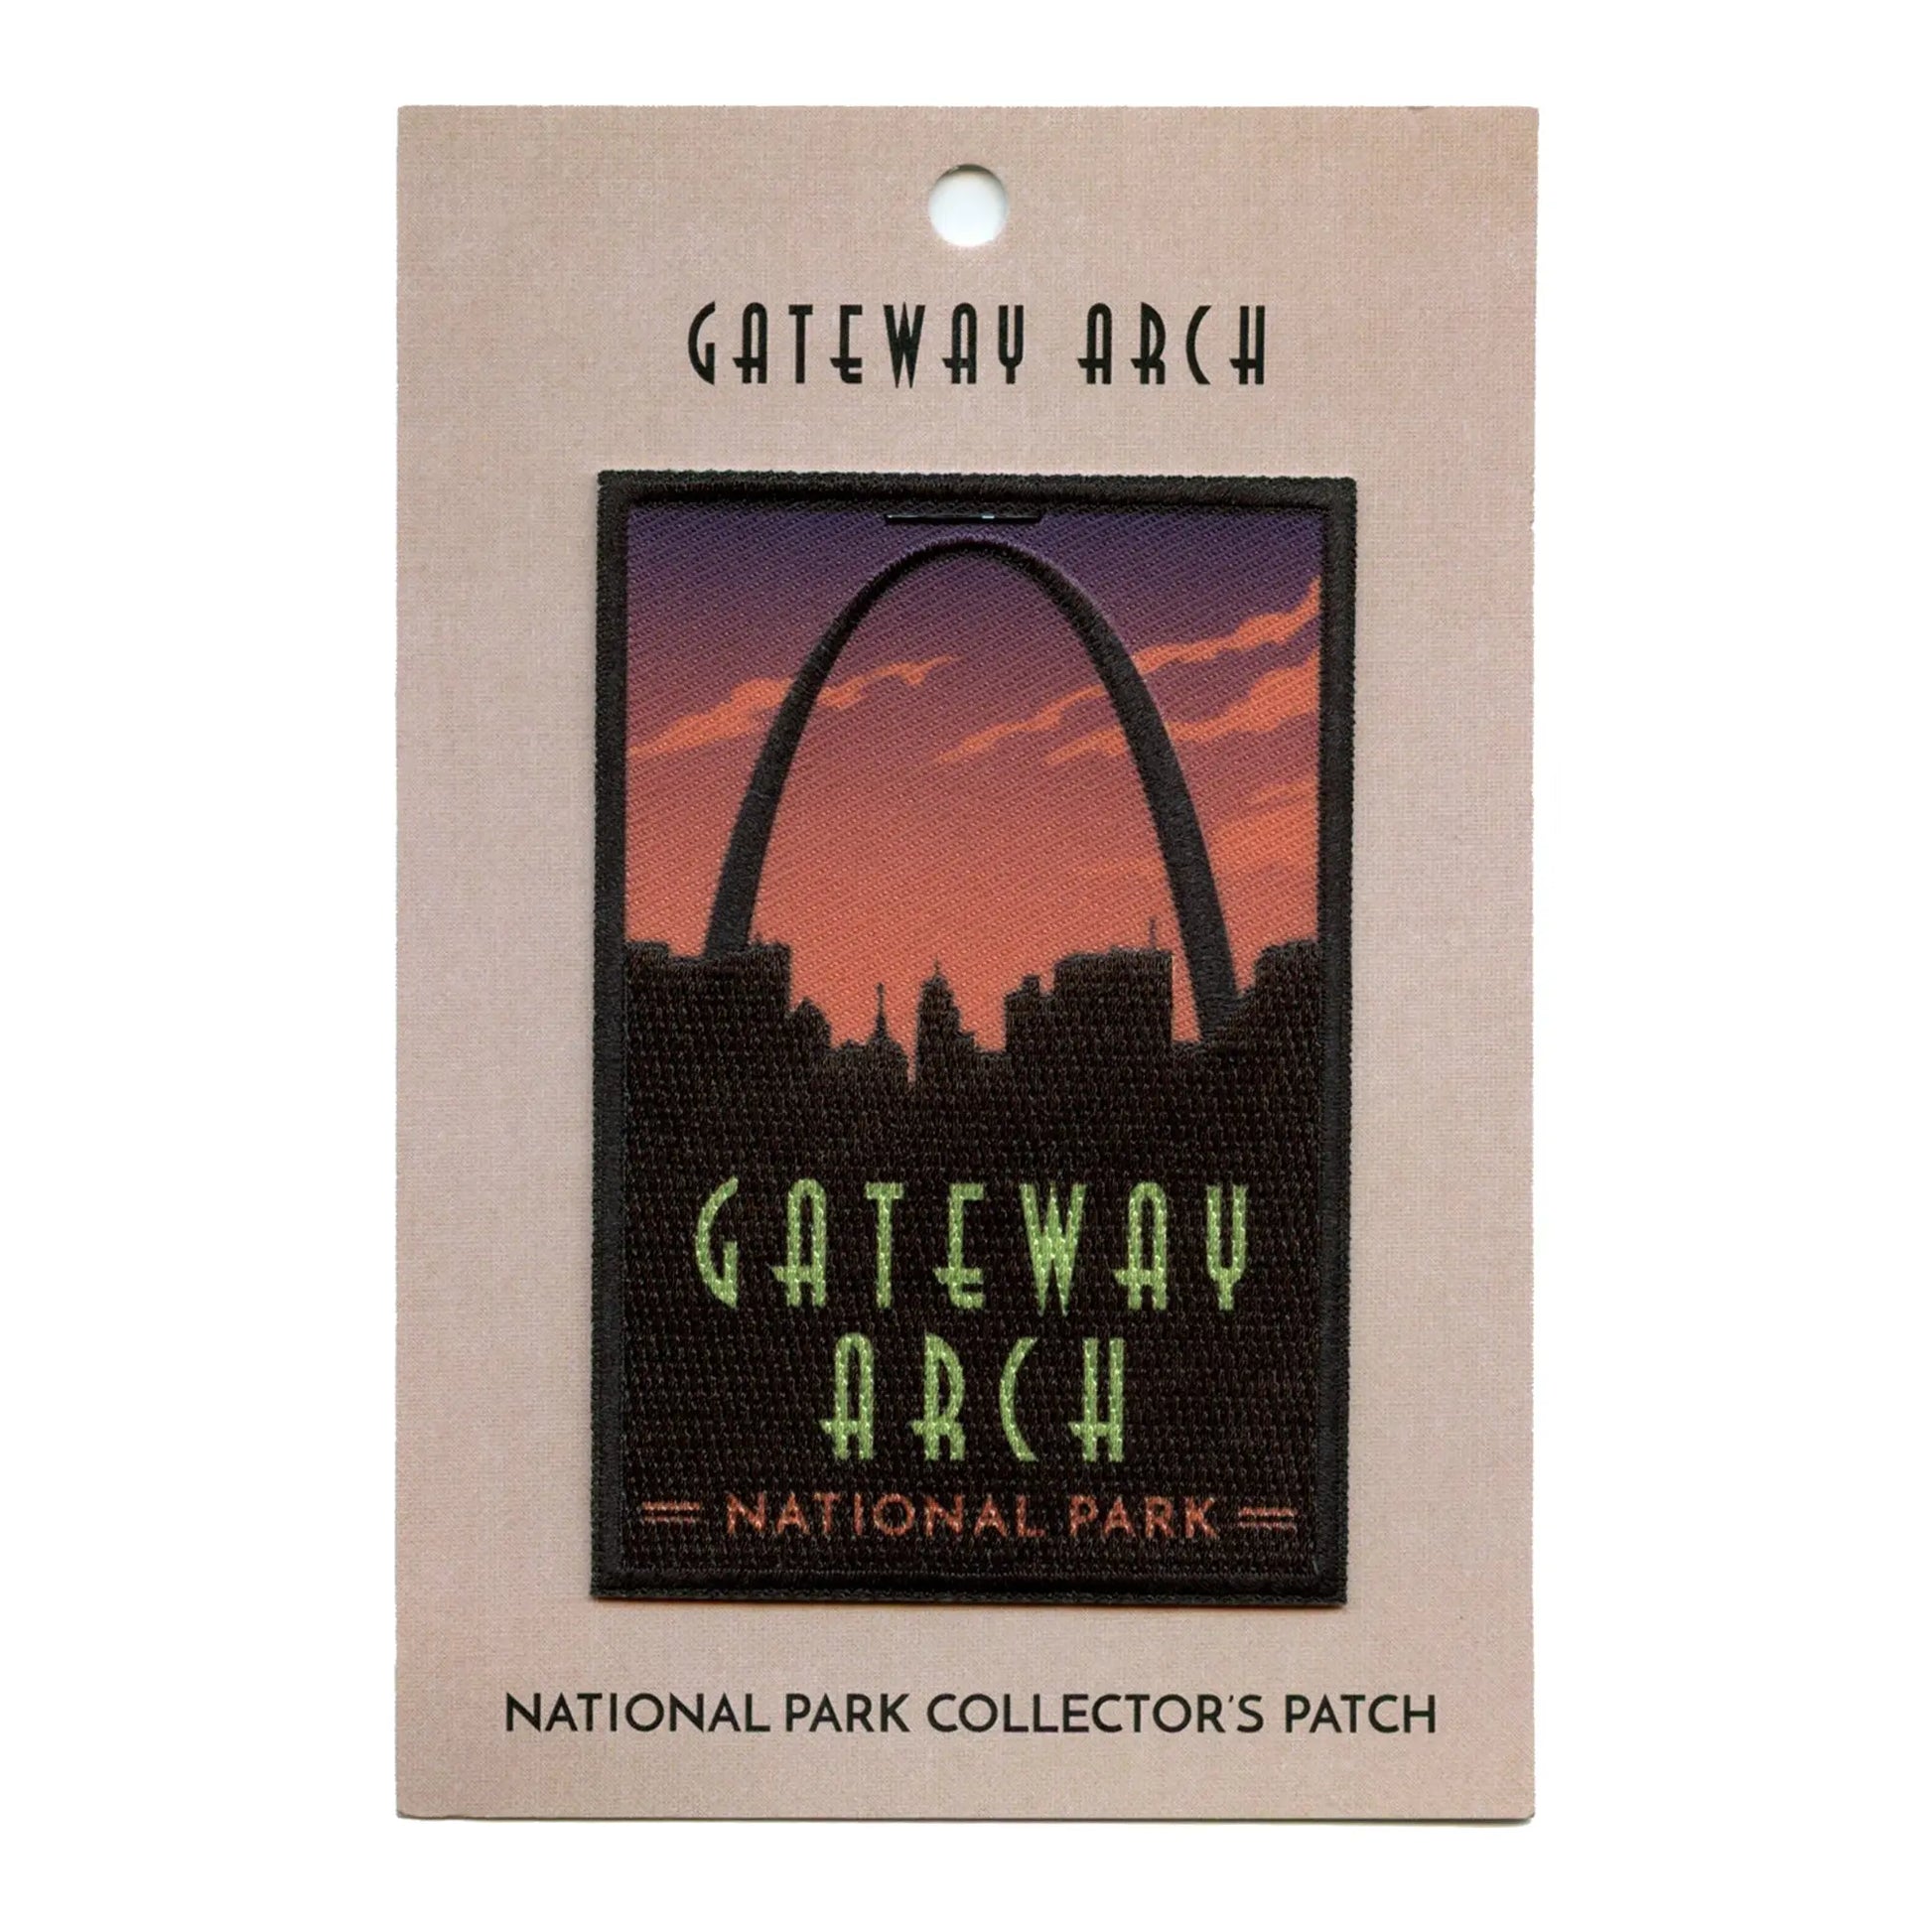 Gateway Arch National Park Patch St. Louis Missouri Travel embroidered Iron On